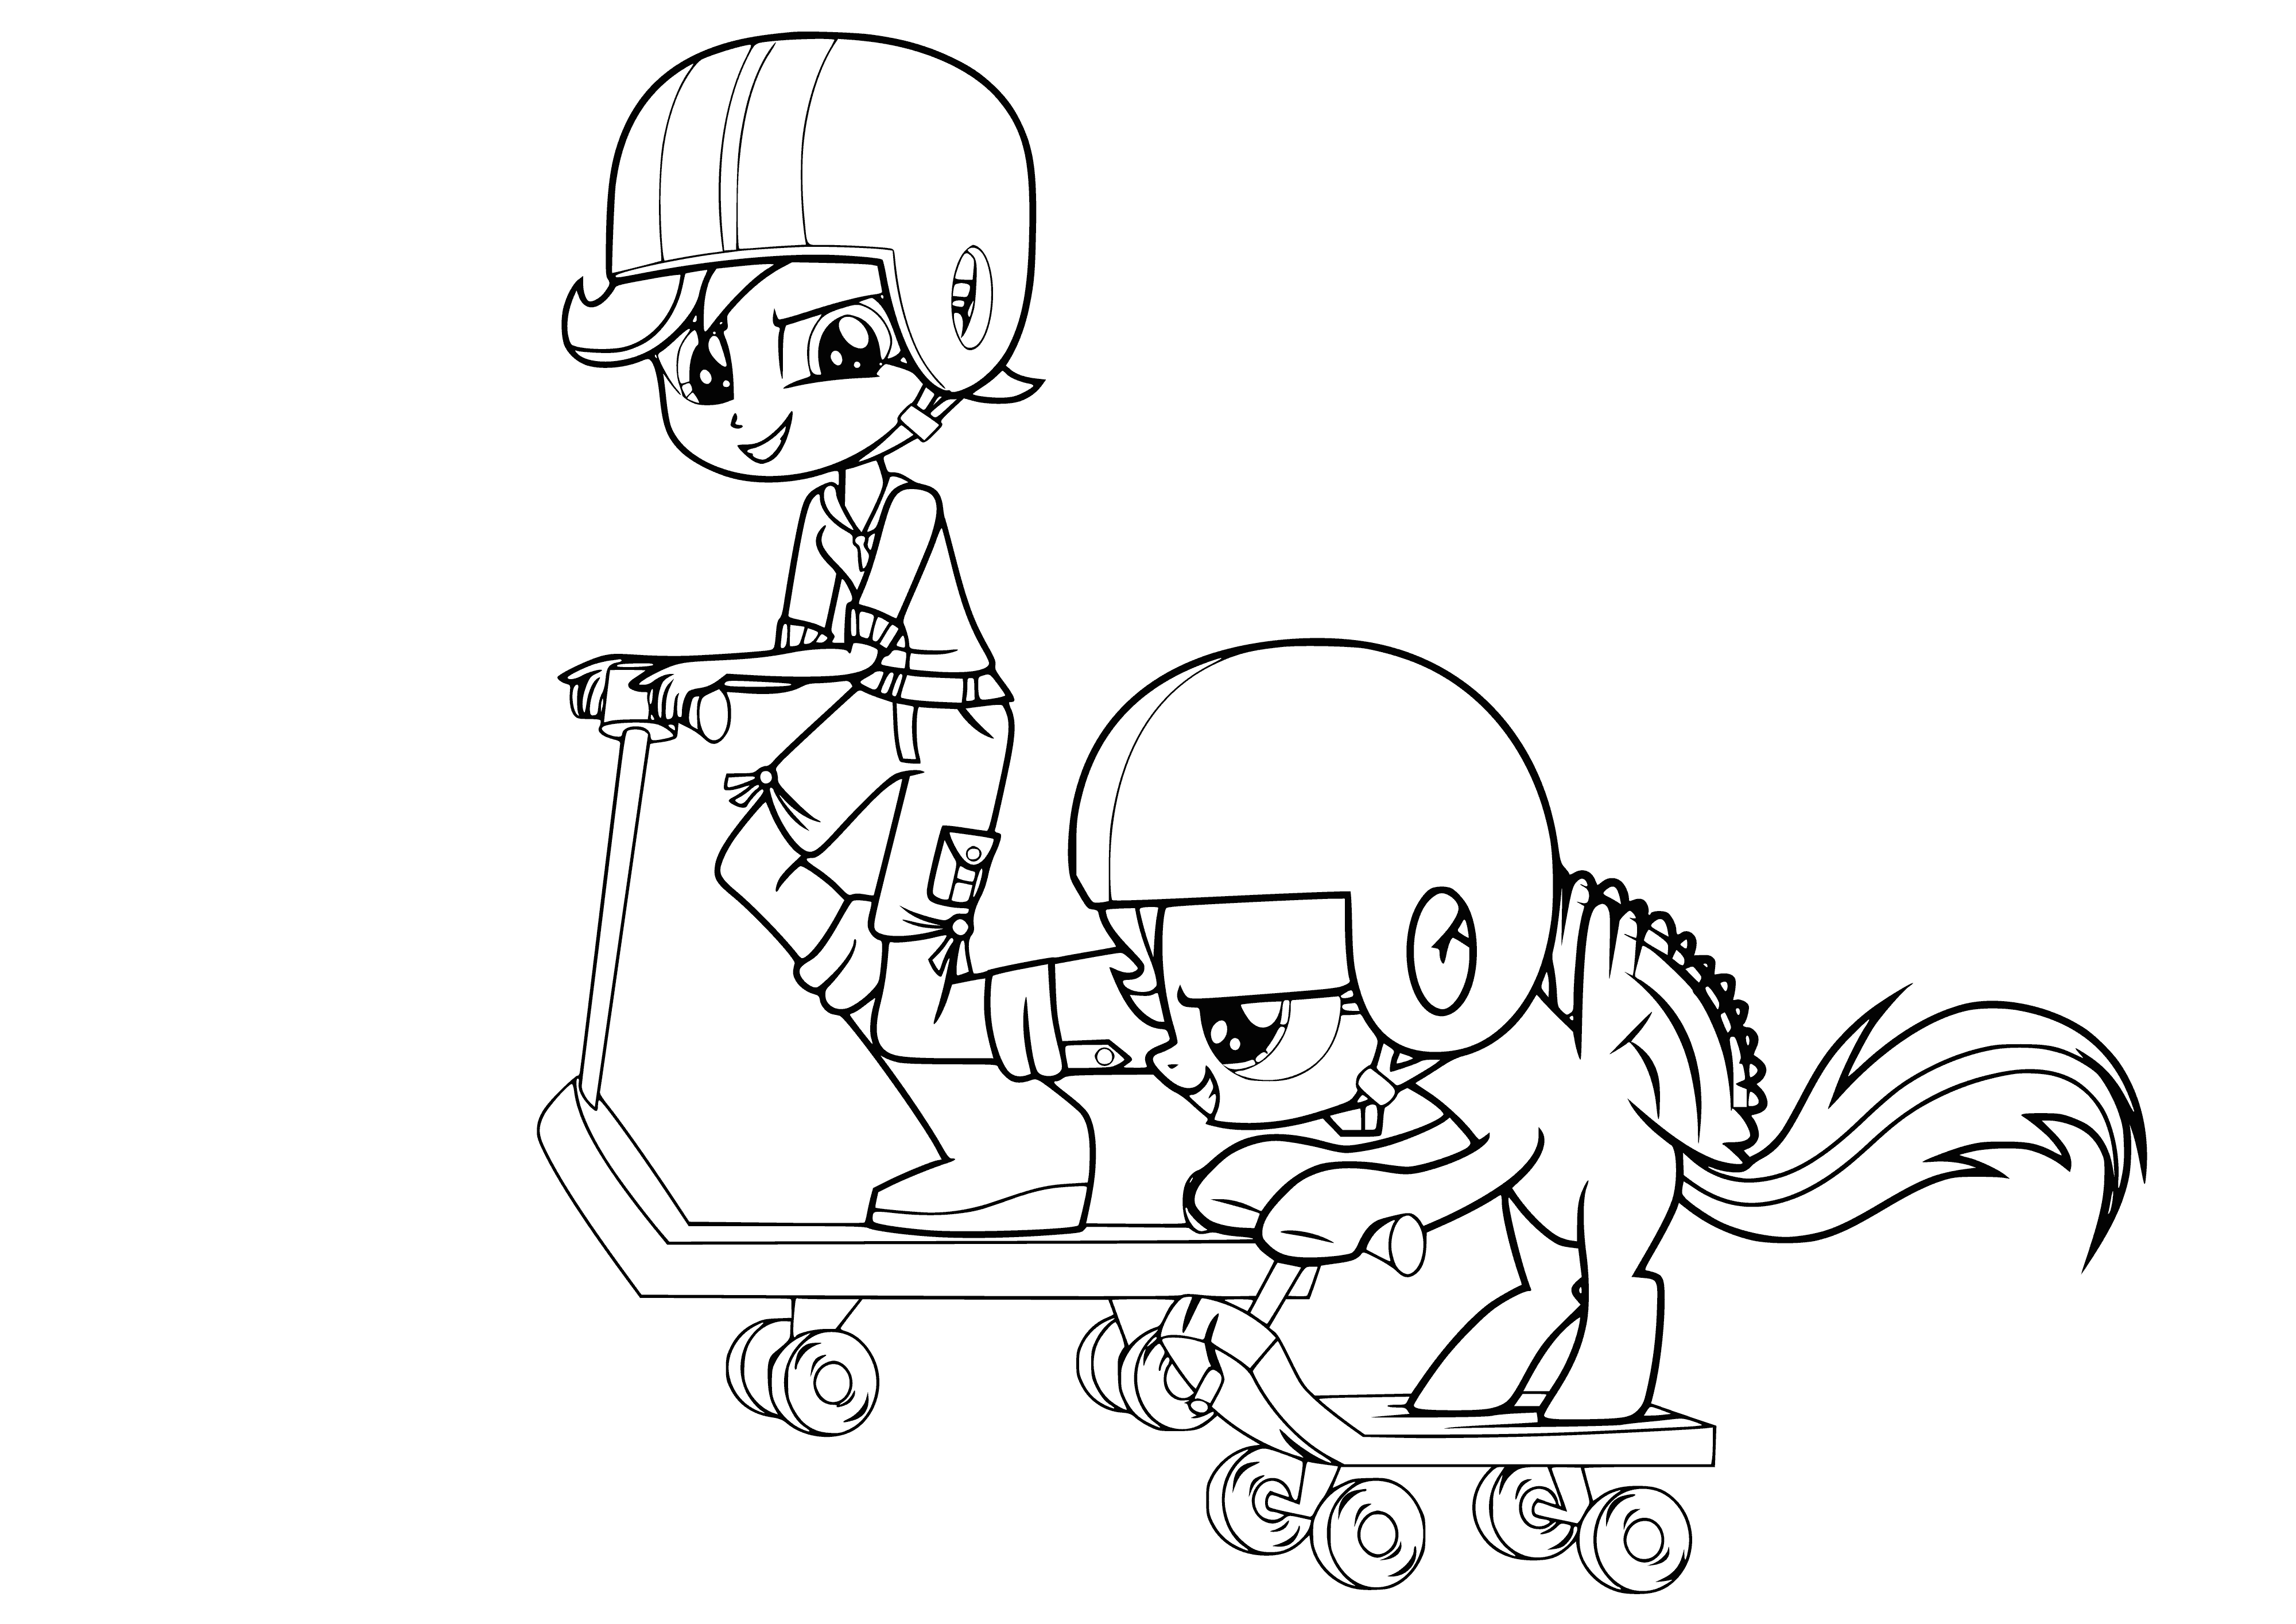 coloring page: Girl with orange hair smiles big as she rides scooter wearing purple shirt, blue jeans.